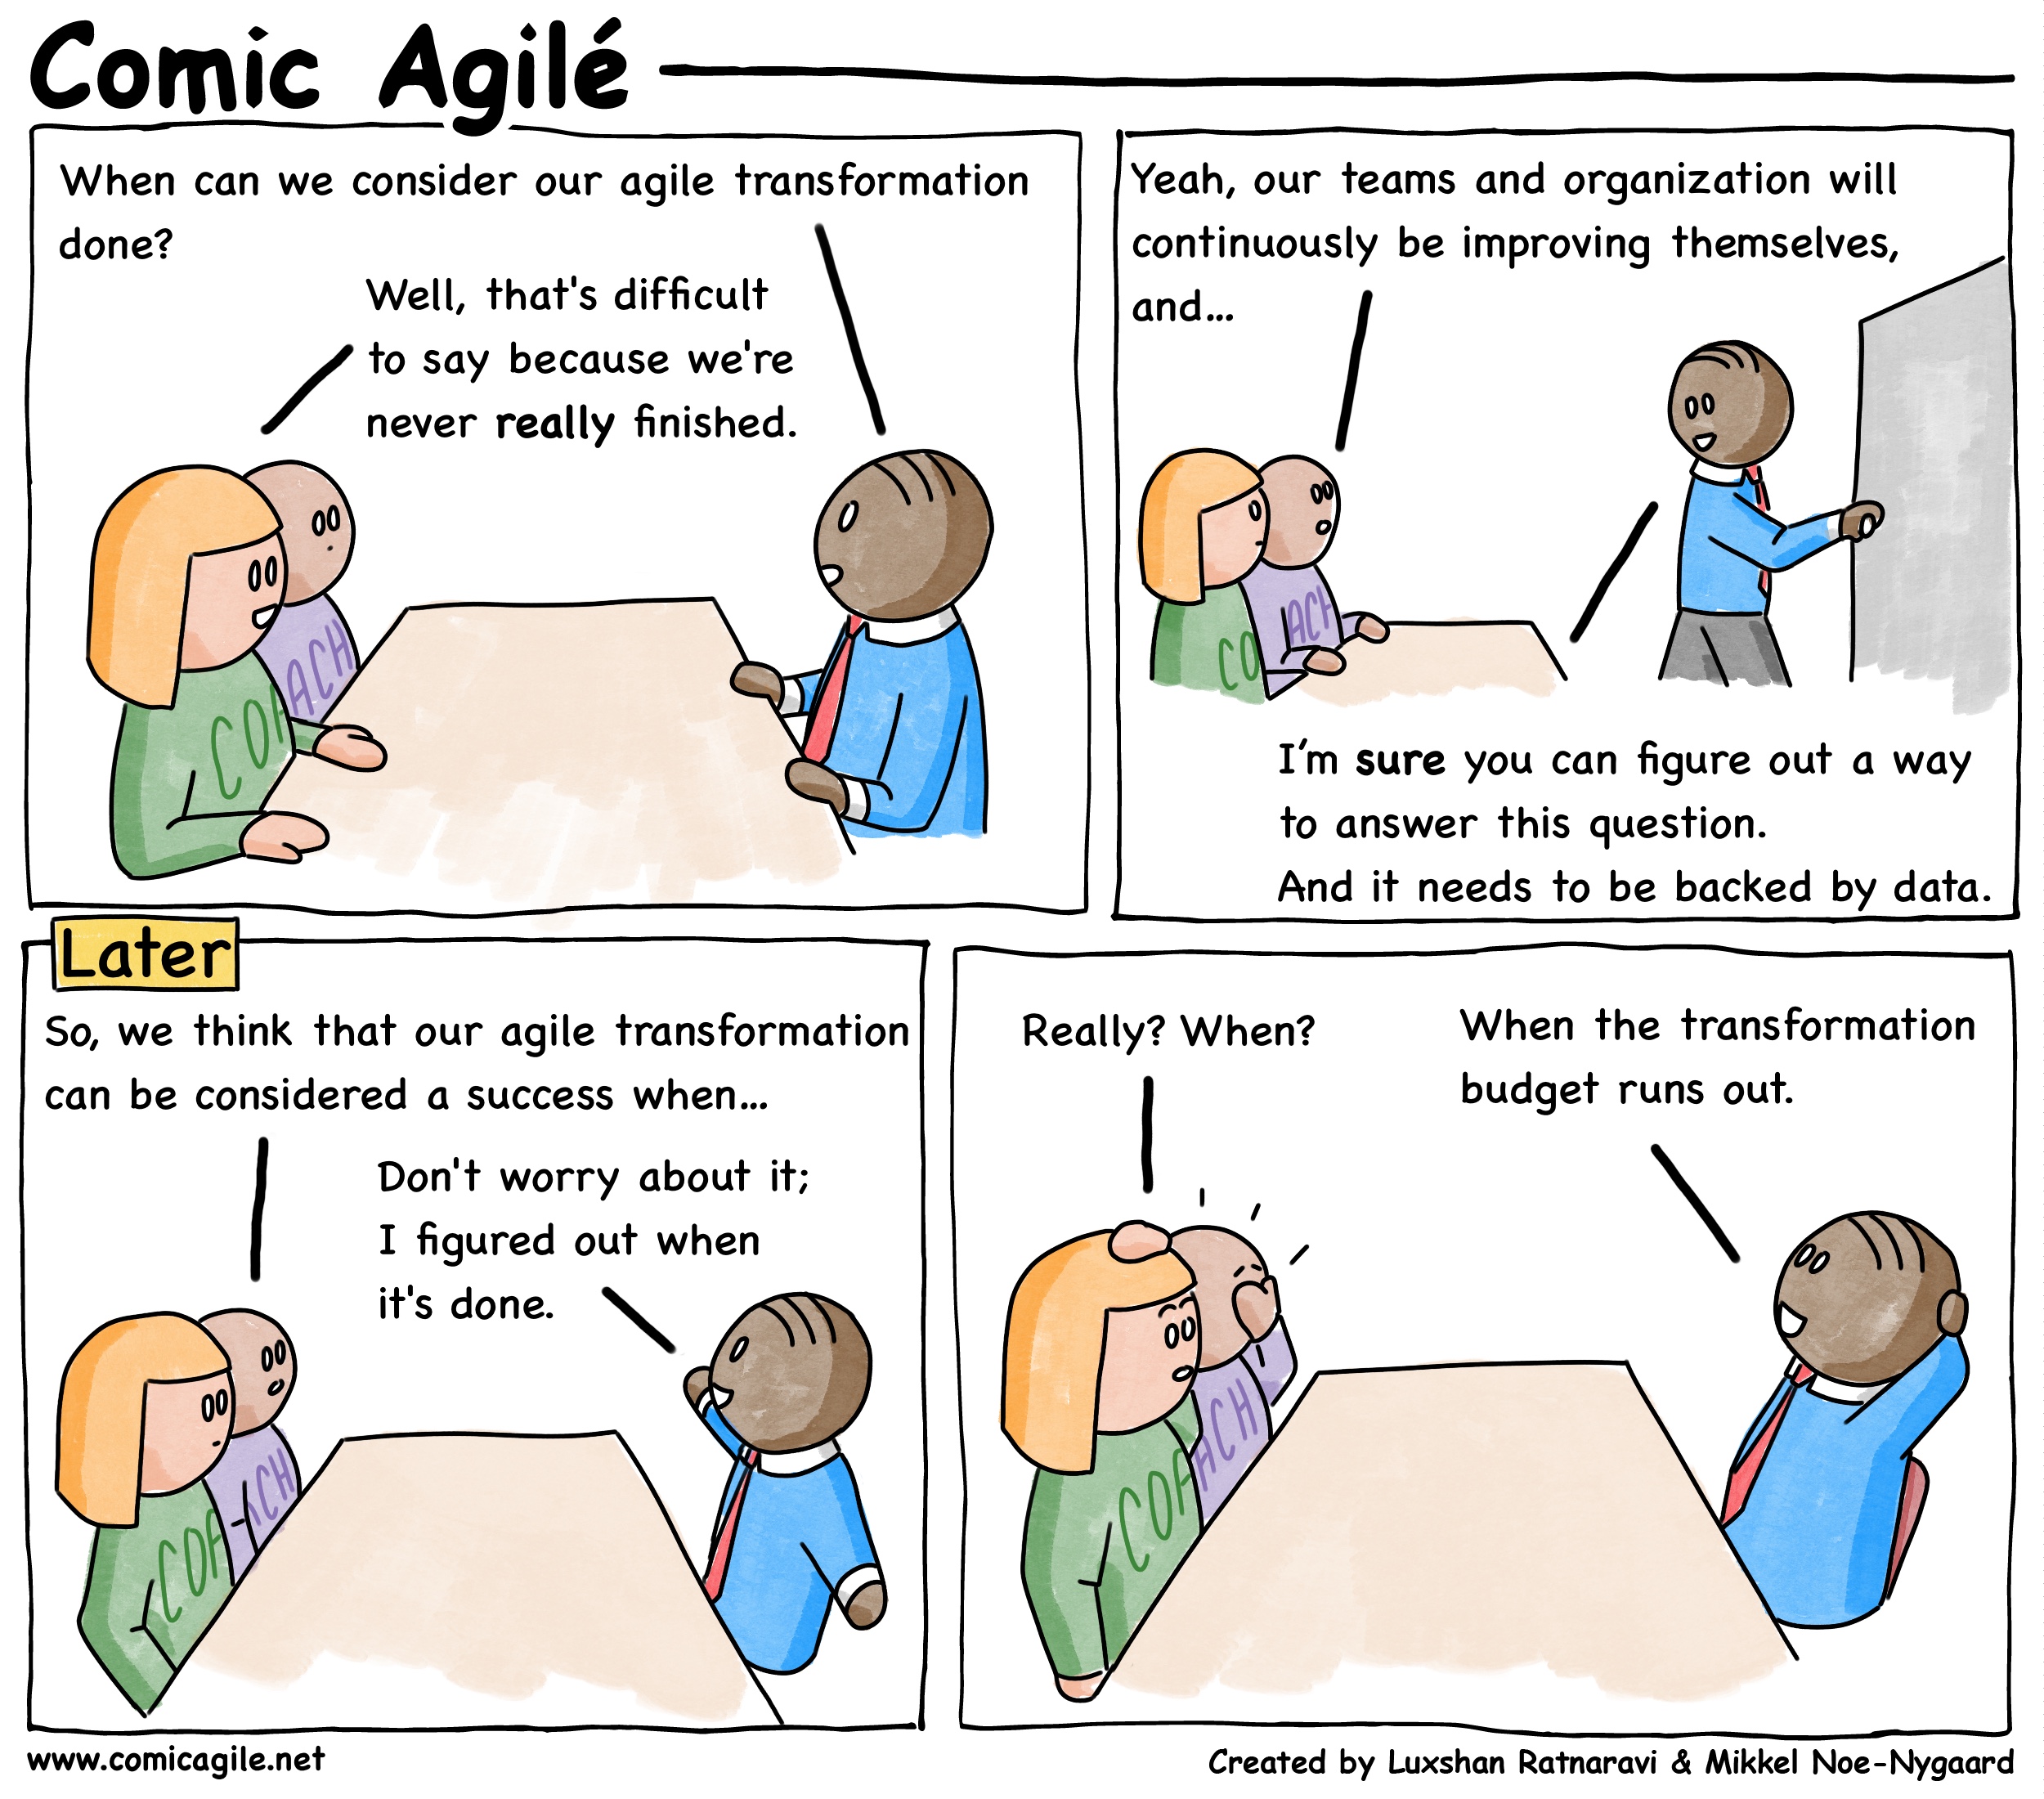 When is the Agile Transformation Done?